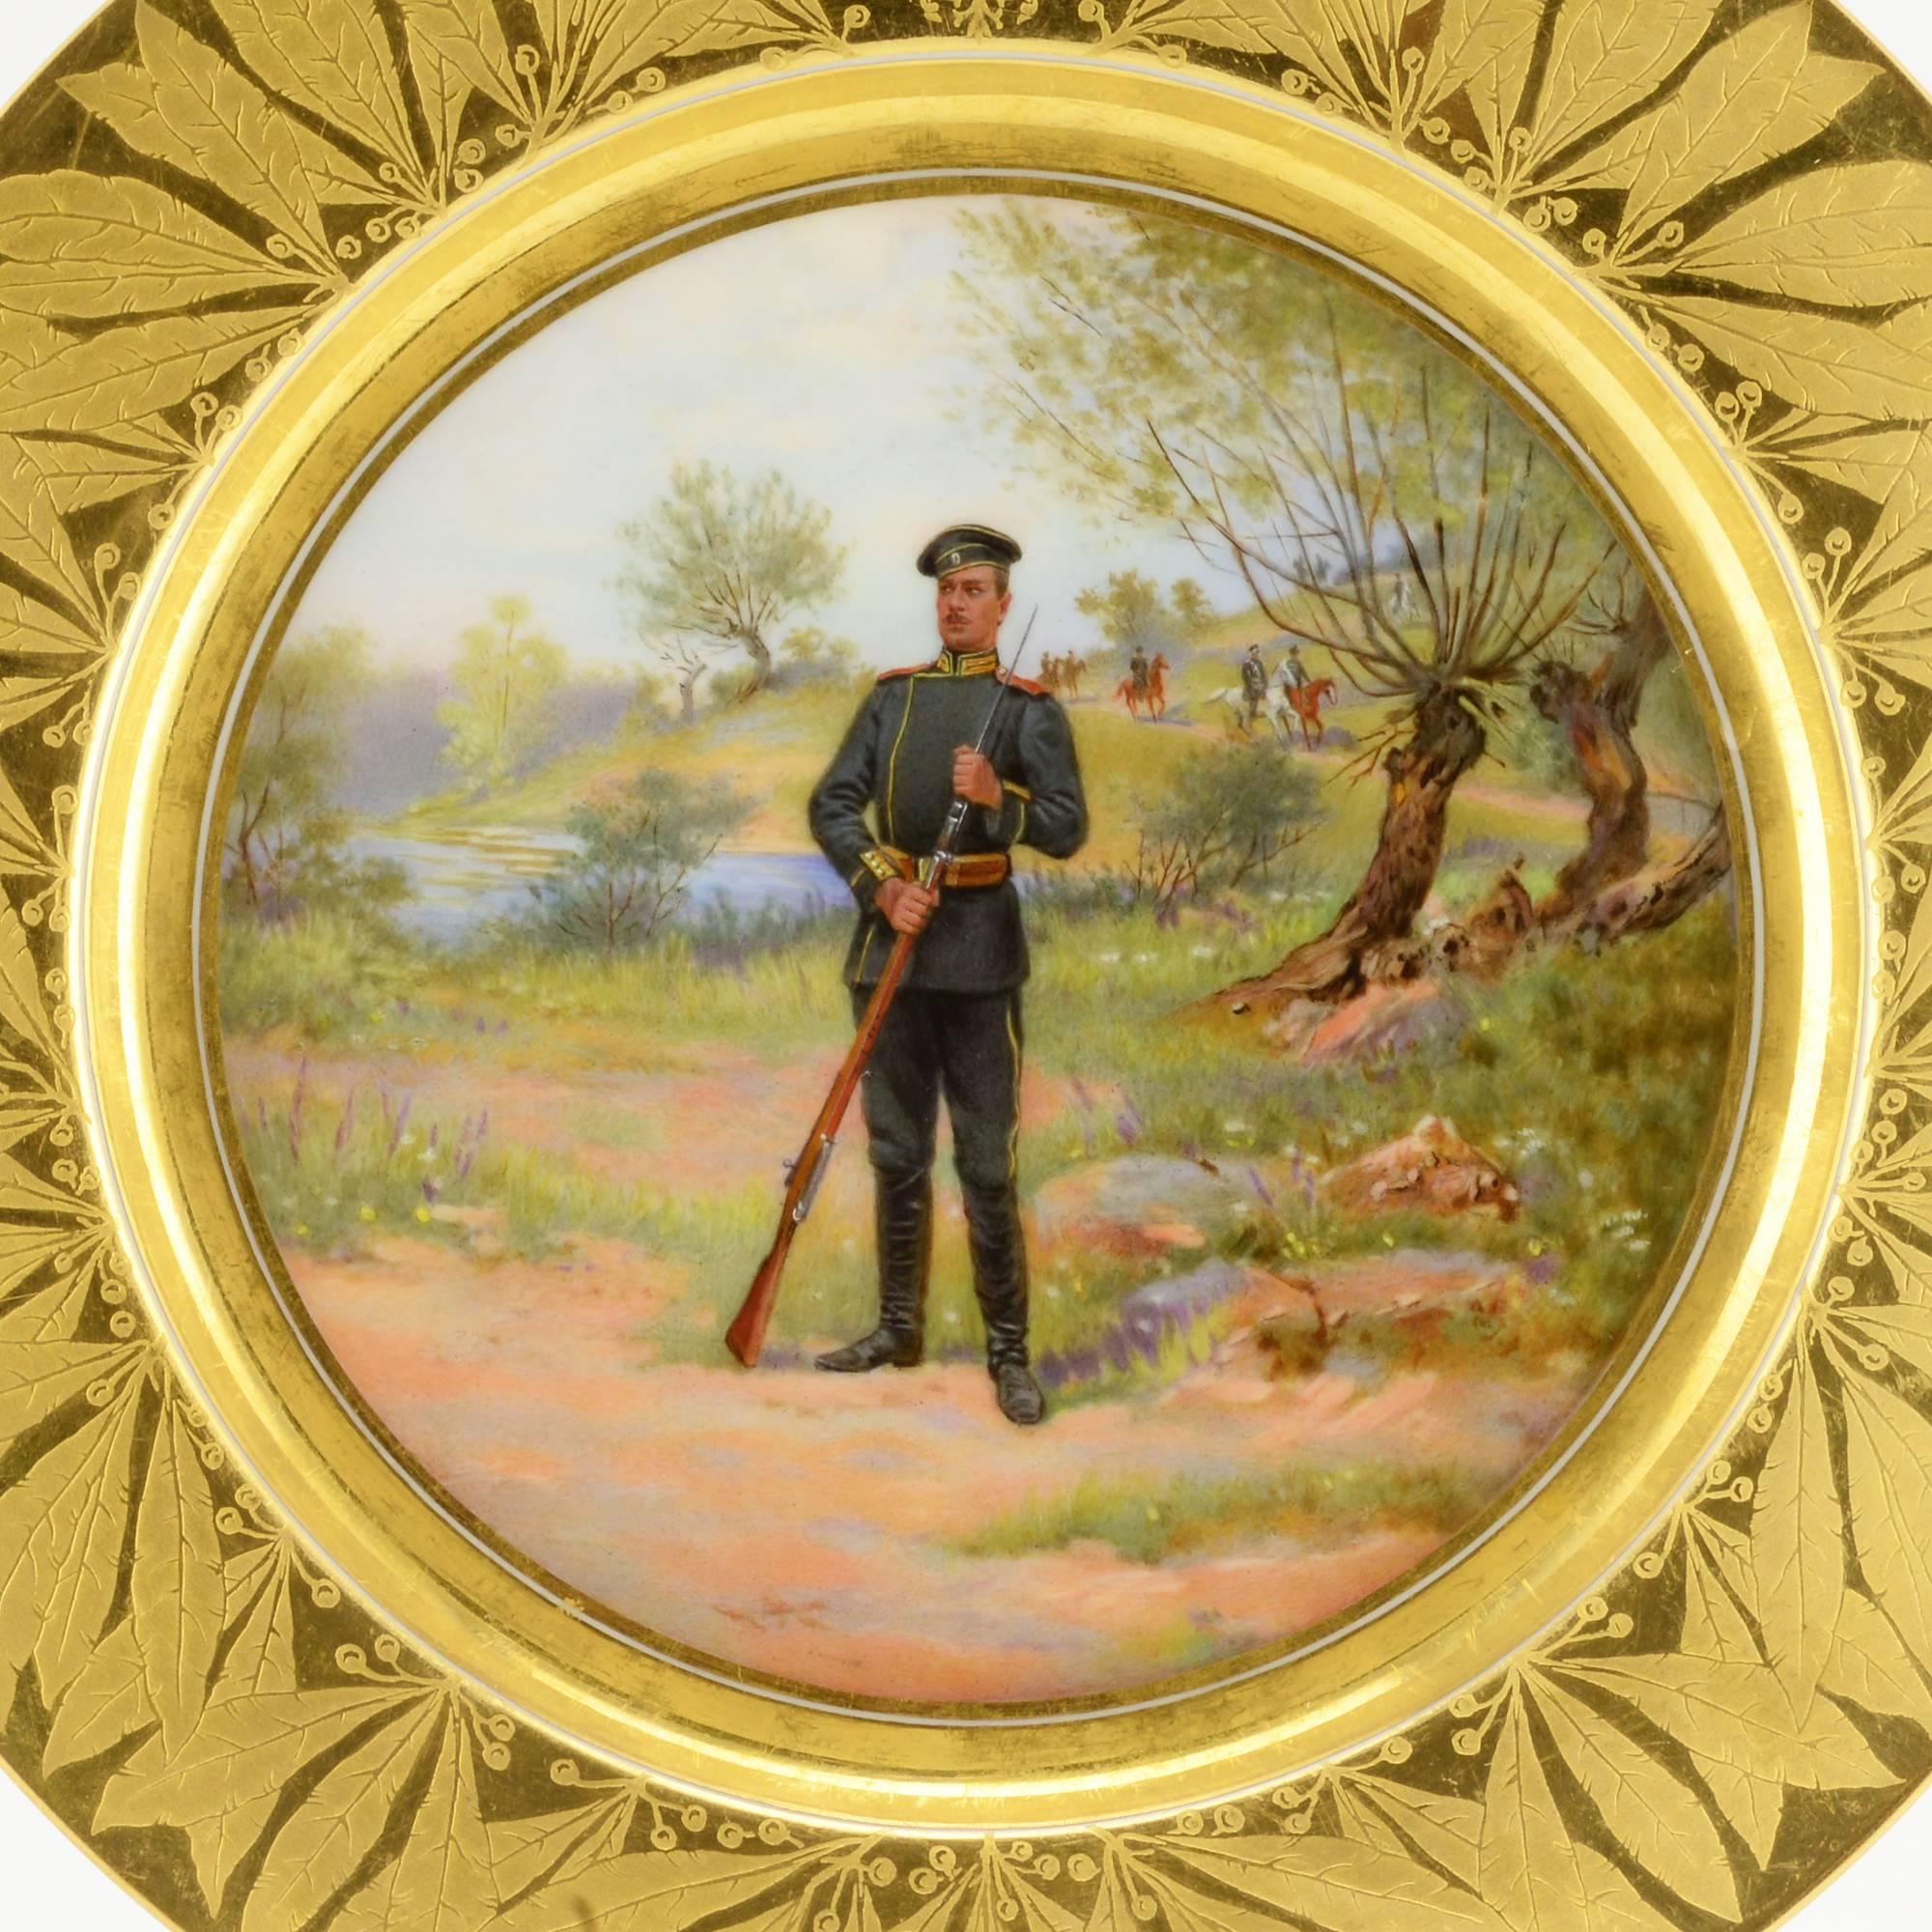 A Russian plate from the military service begun in 1907, Imperial Porcelain Factory, ST Petersburg, 1910. Circular, the cavetto painted with a view of a soldier of the Volinsky, or Volhynian Life-Guards Regiment (Волынский лейб-гвардии полк) in